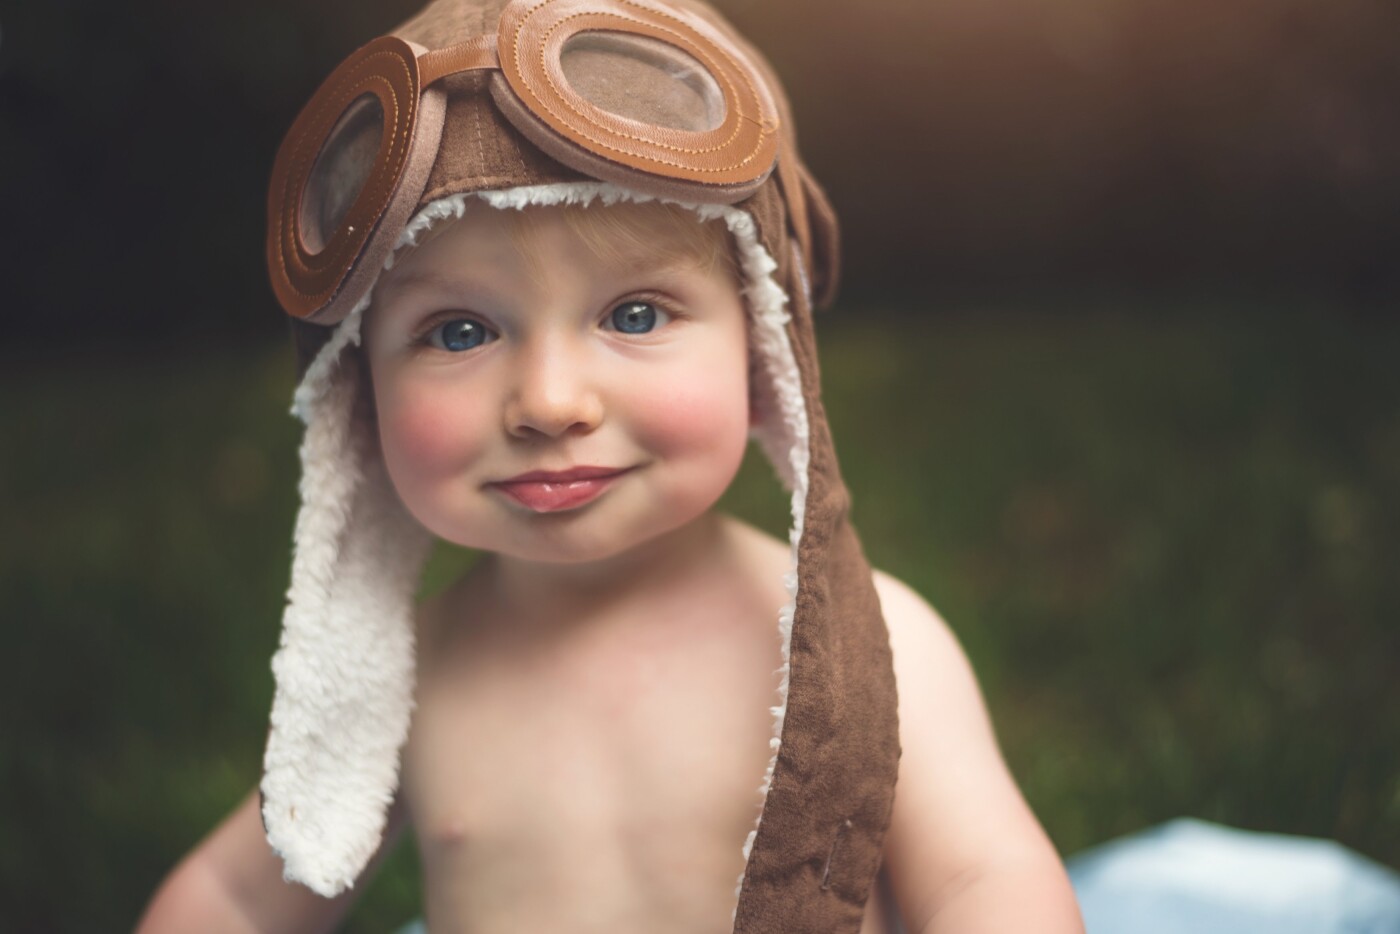 Noah is such a little sweetheart! His grandfather is a pilot, and when I was doing his milestone session, we were able to grab his little aviator hat and a little wooden plane and have some fun! It was a perfect fathers day present for his grandfather too!